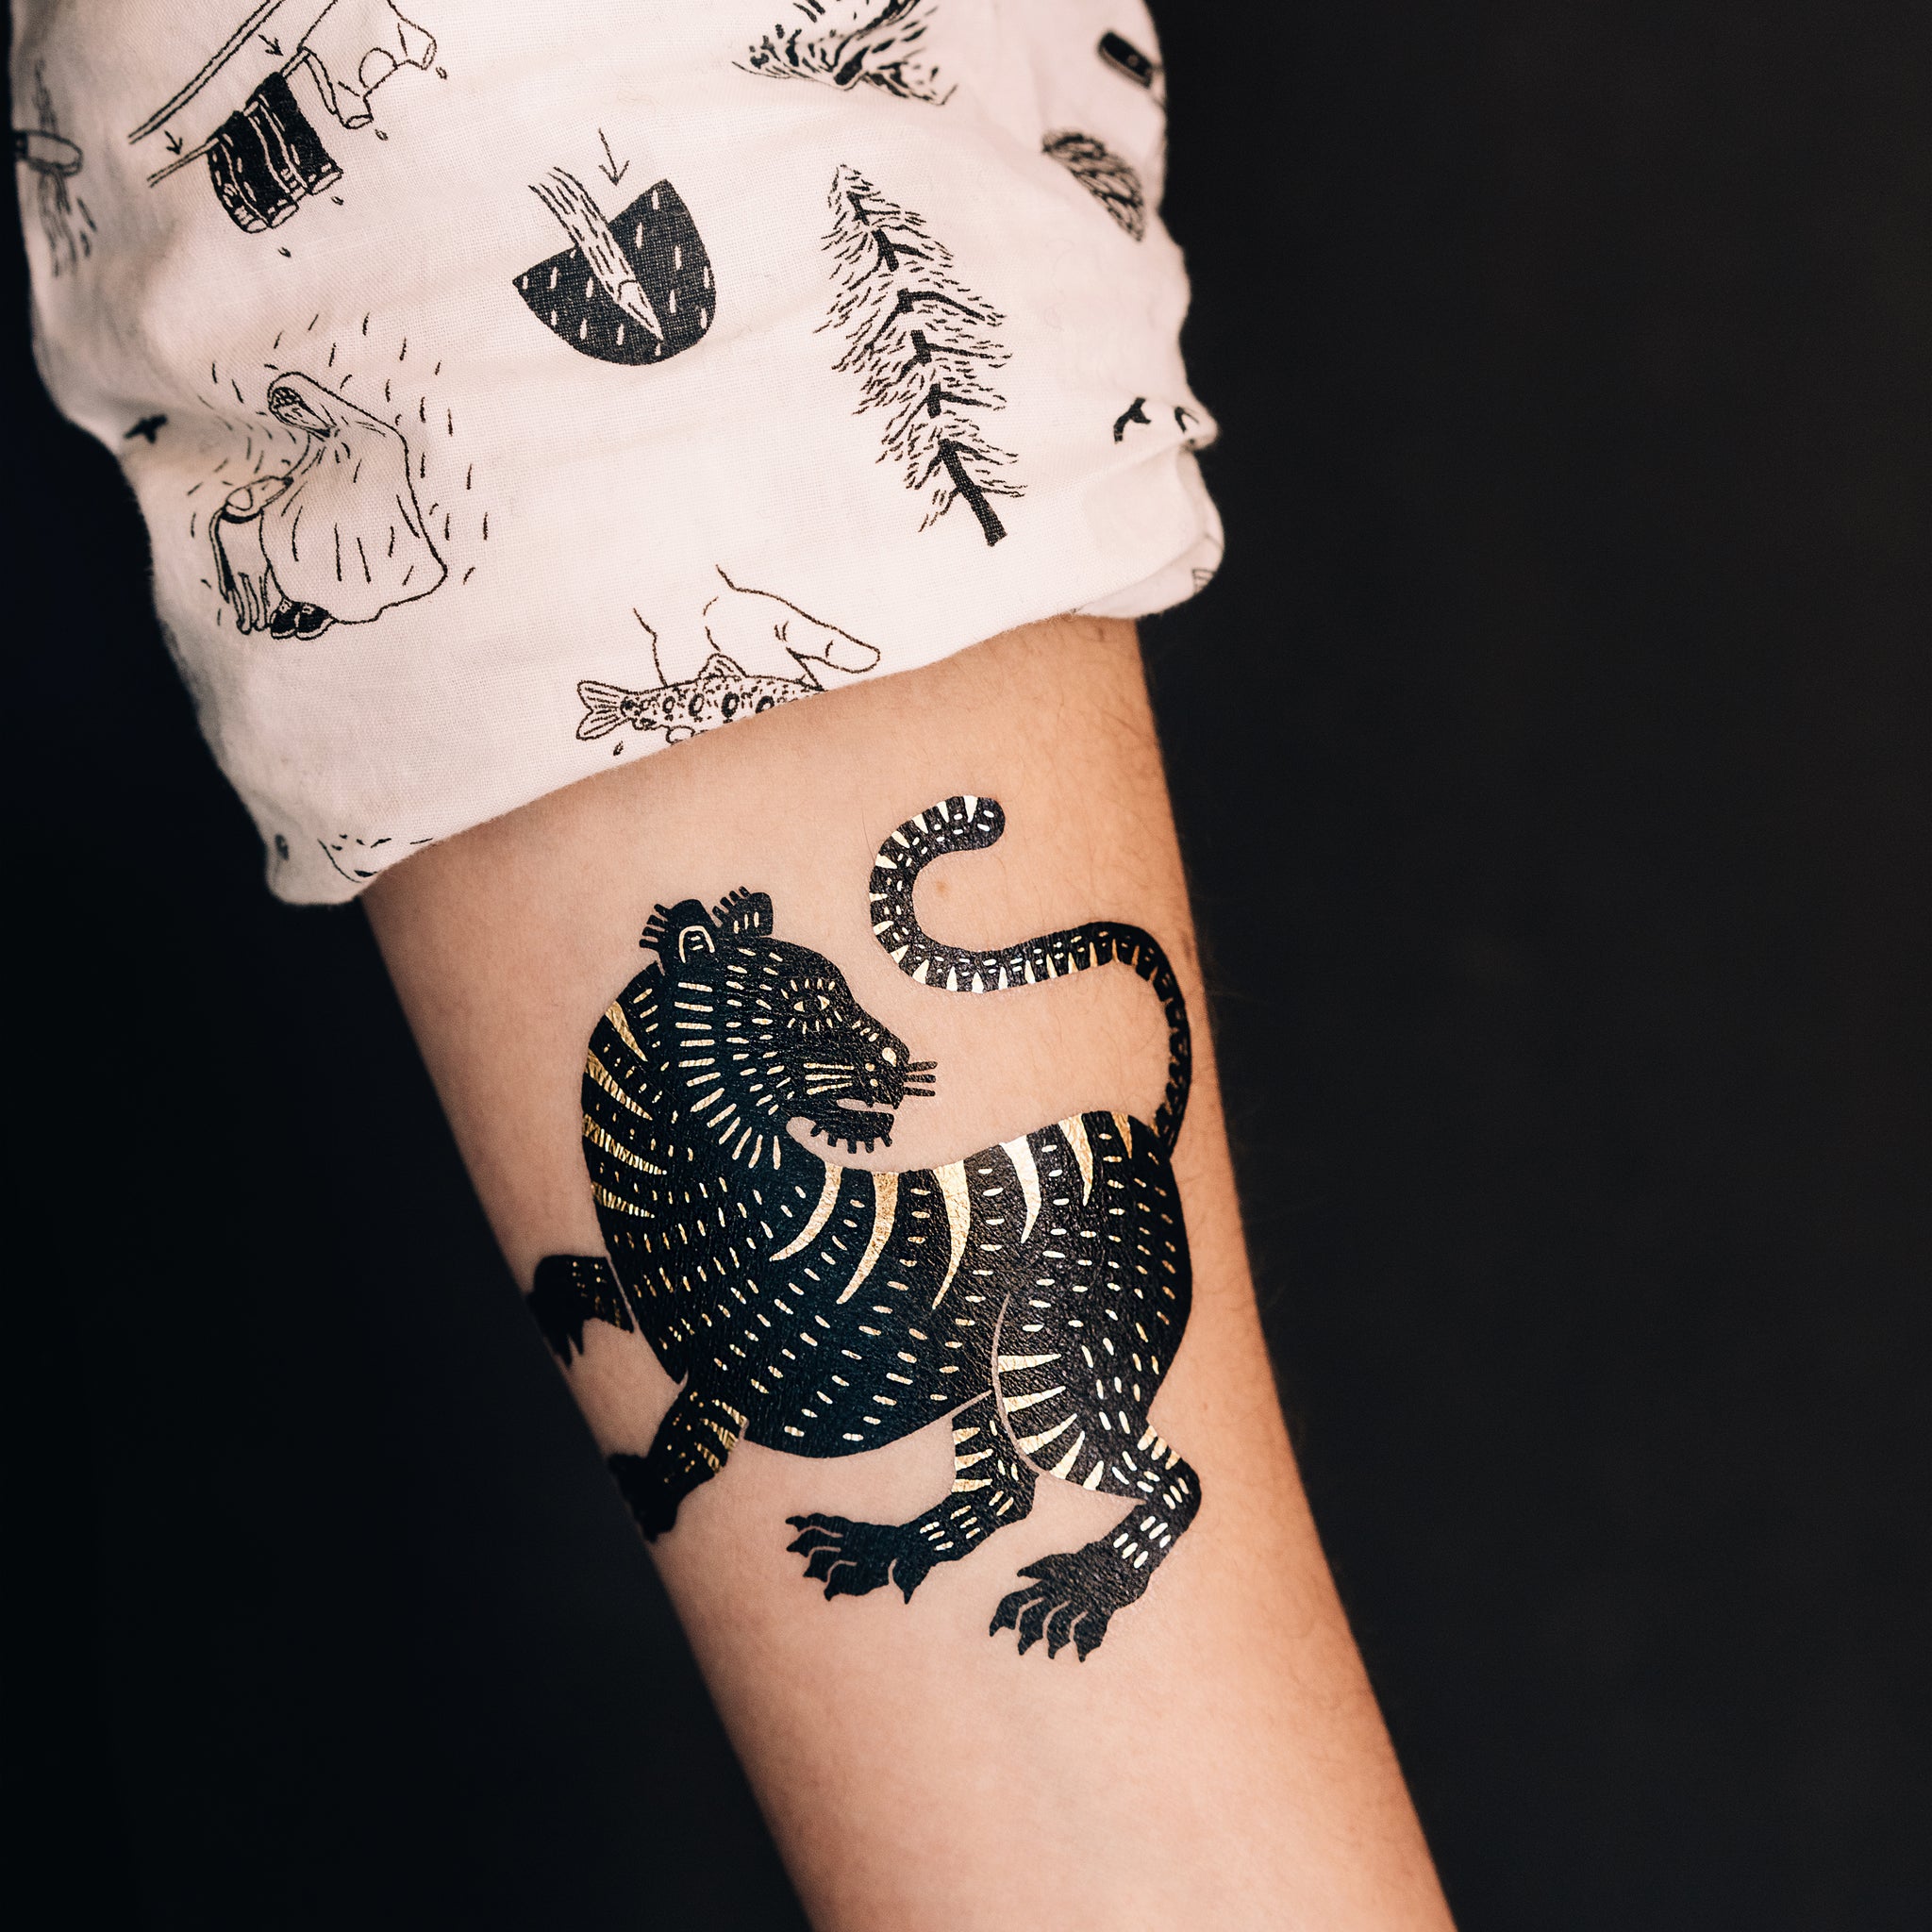 What is a great tiger tattoo design? - Quora